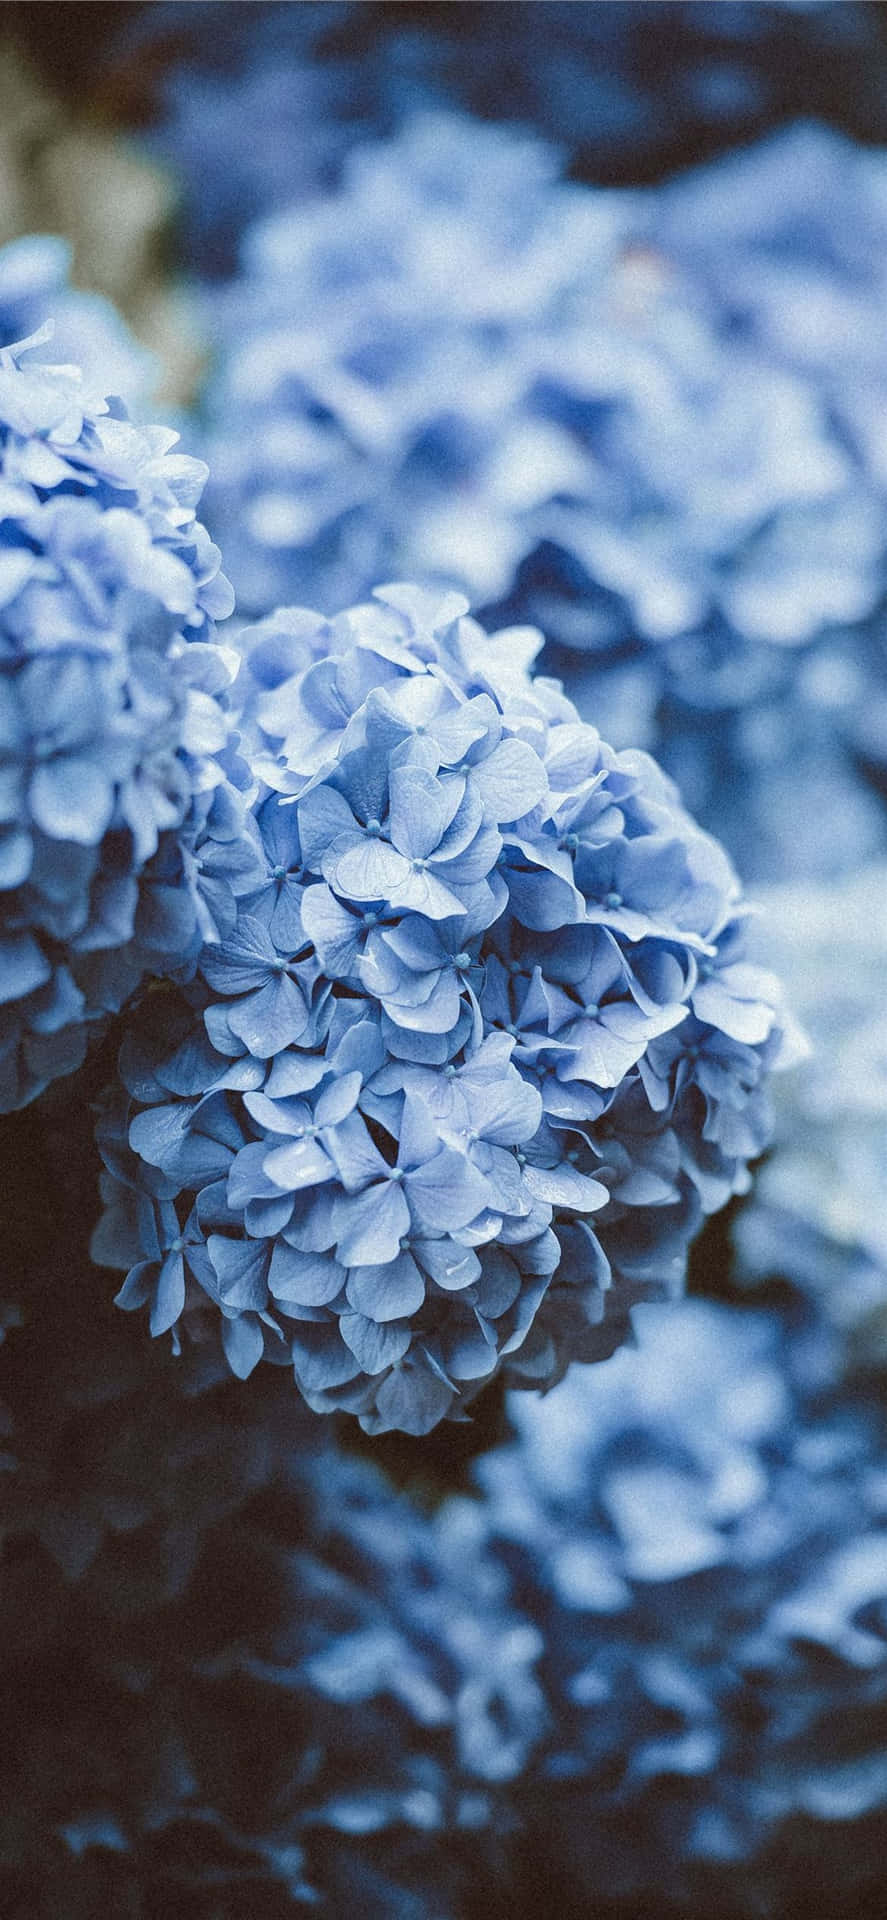 Hortensia Aesthetic Blue Flowers Picture